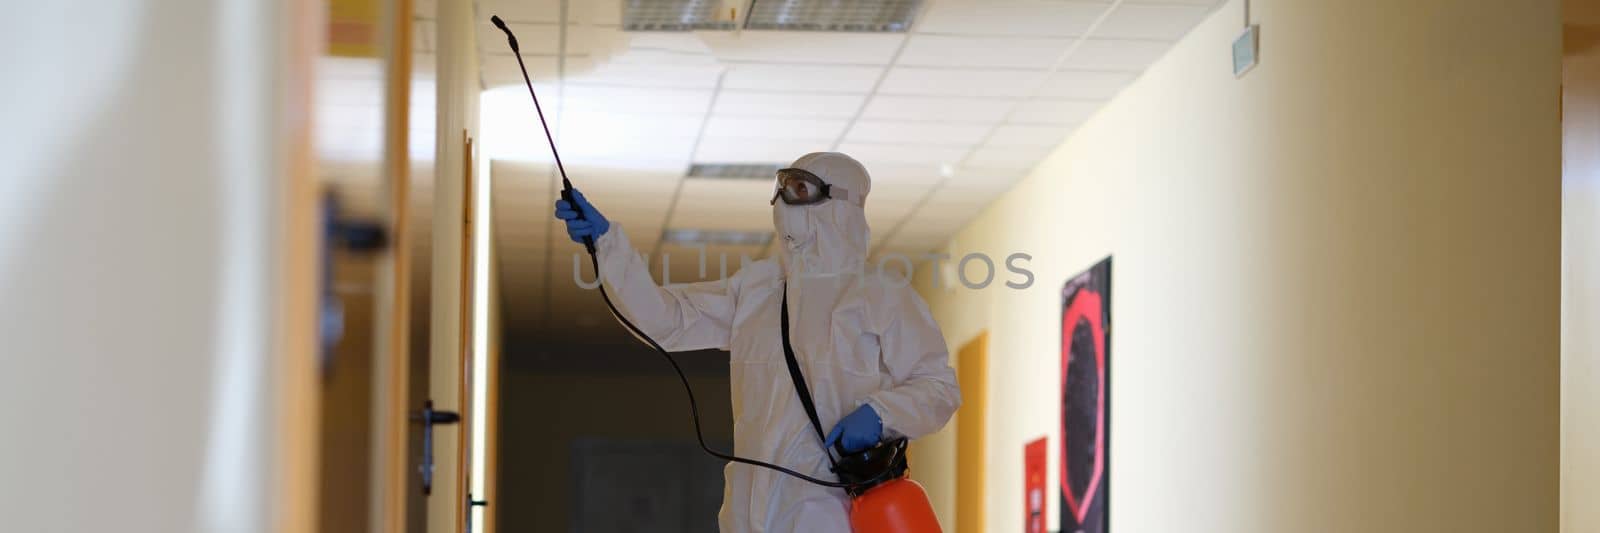 Person in protective suit with disinfectant cleaning public area in building during pandemic by kuprevich